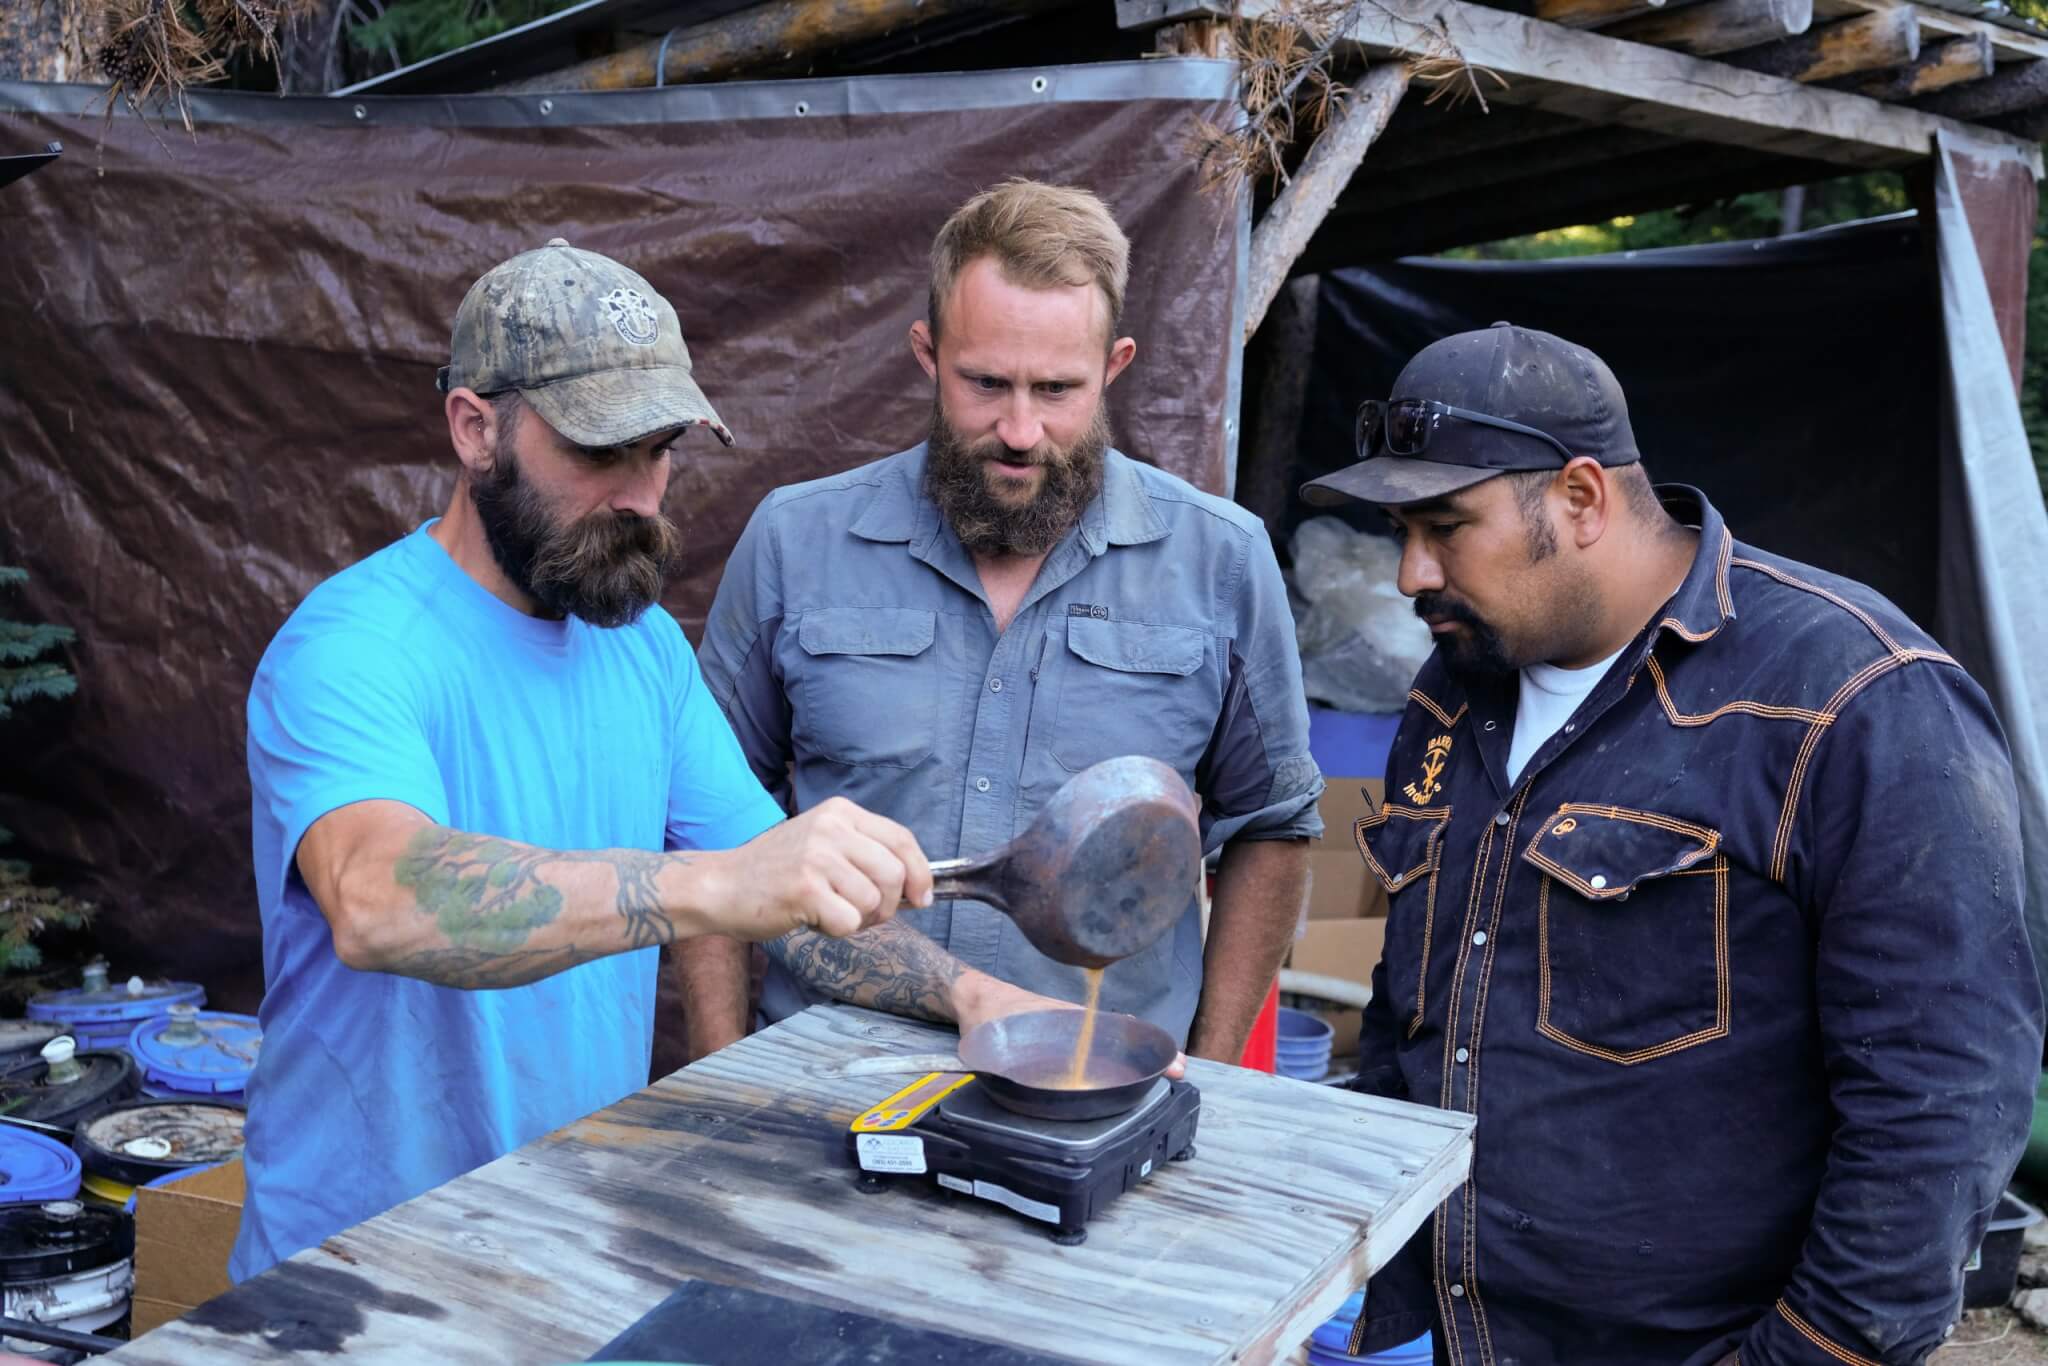 Fred Lewis, Kendell Madden and Juan Ibarra pouring gold. Source: Discovery Channel